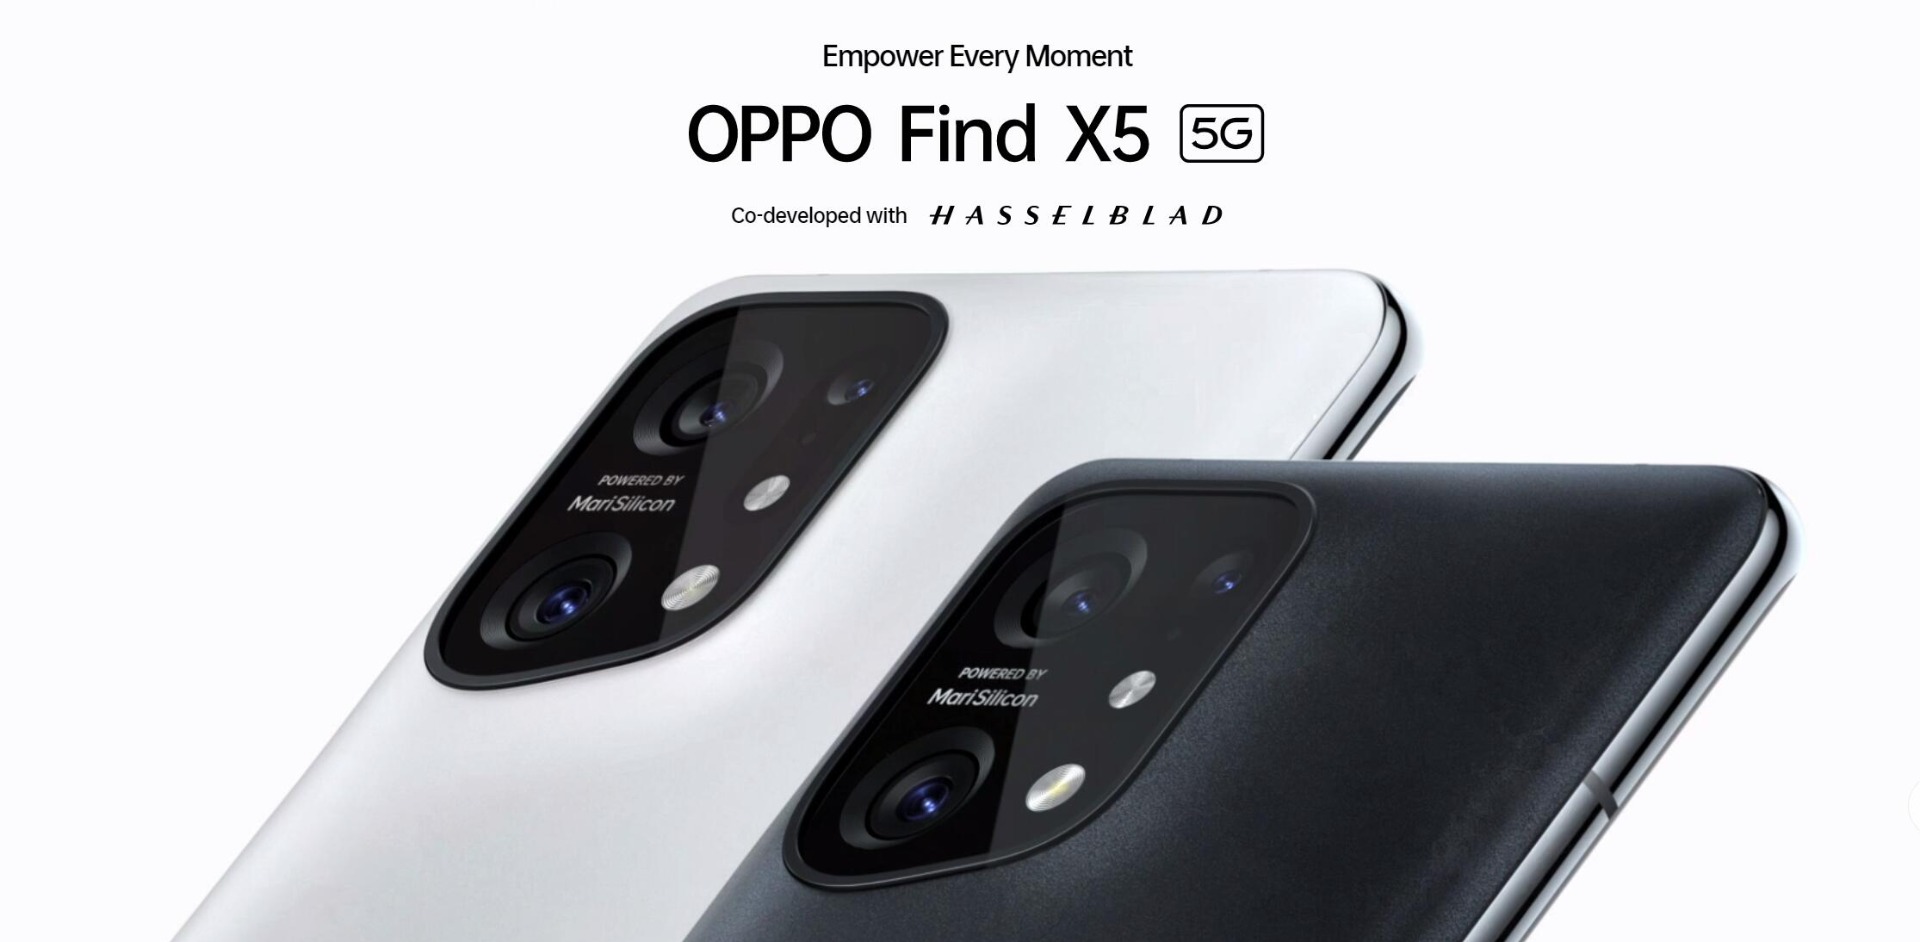 Oppo Find X5 5G 6.55 8/256GB 50MP Snapdragon 888 Hasselblad 4800mAh CN  SHIP